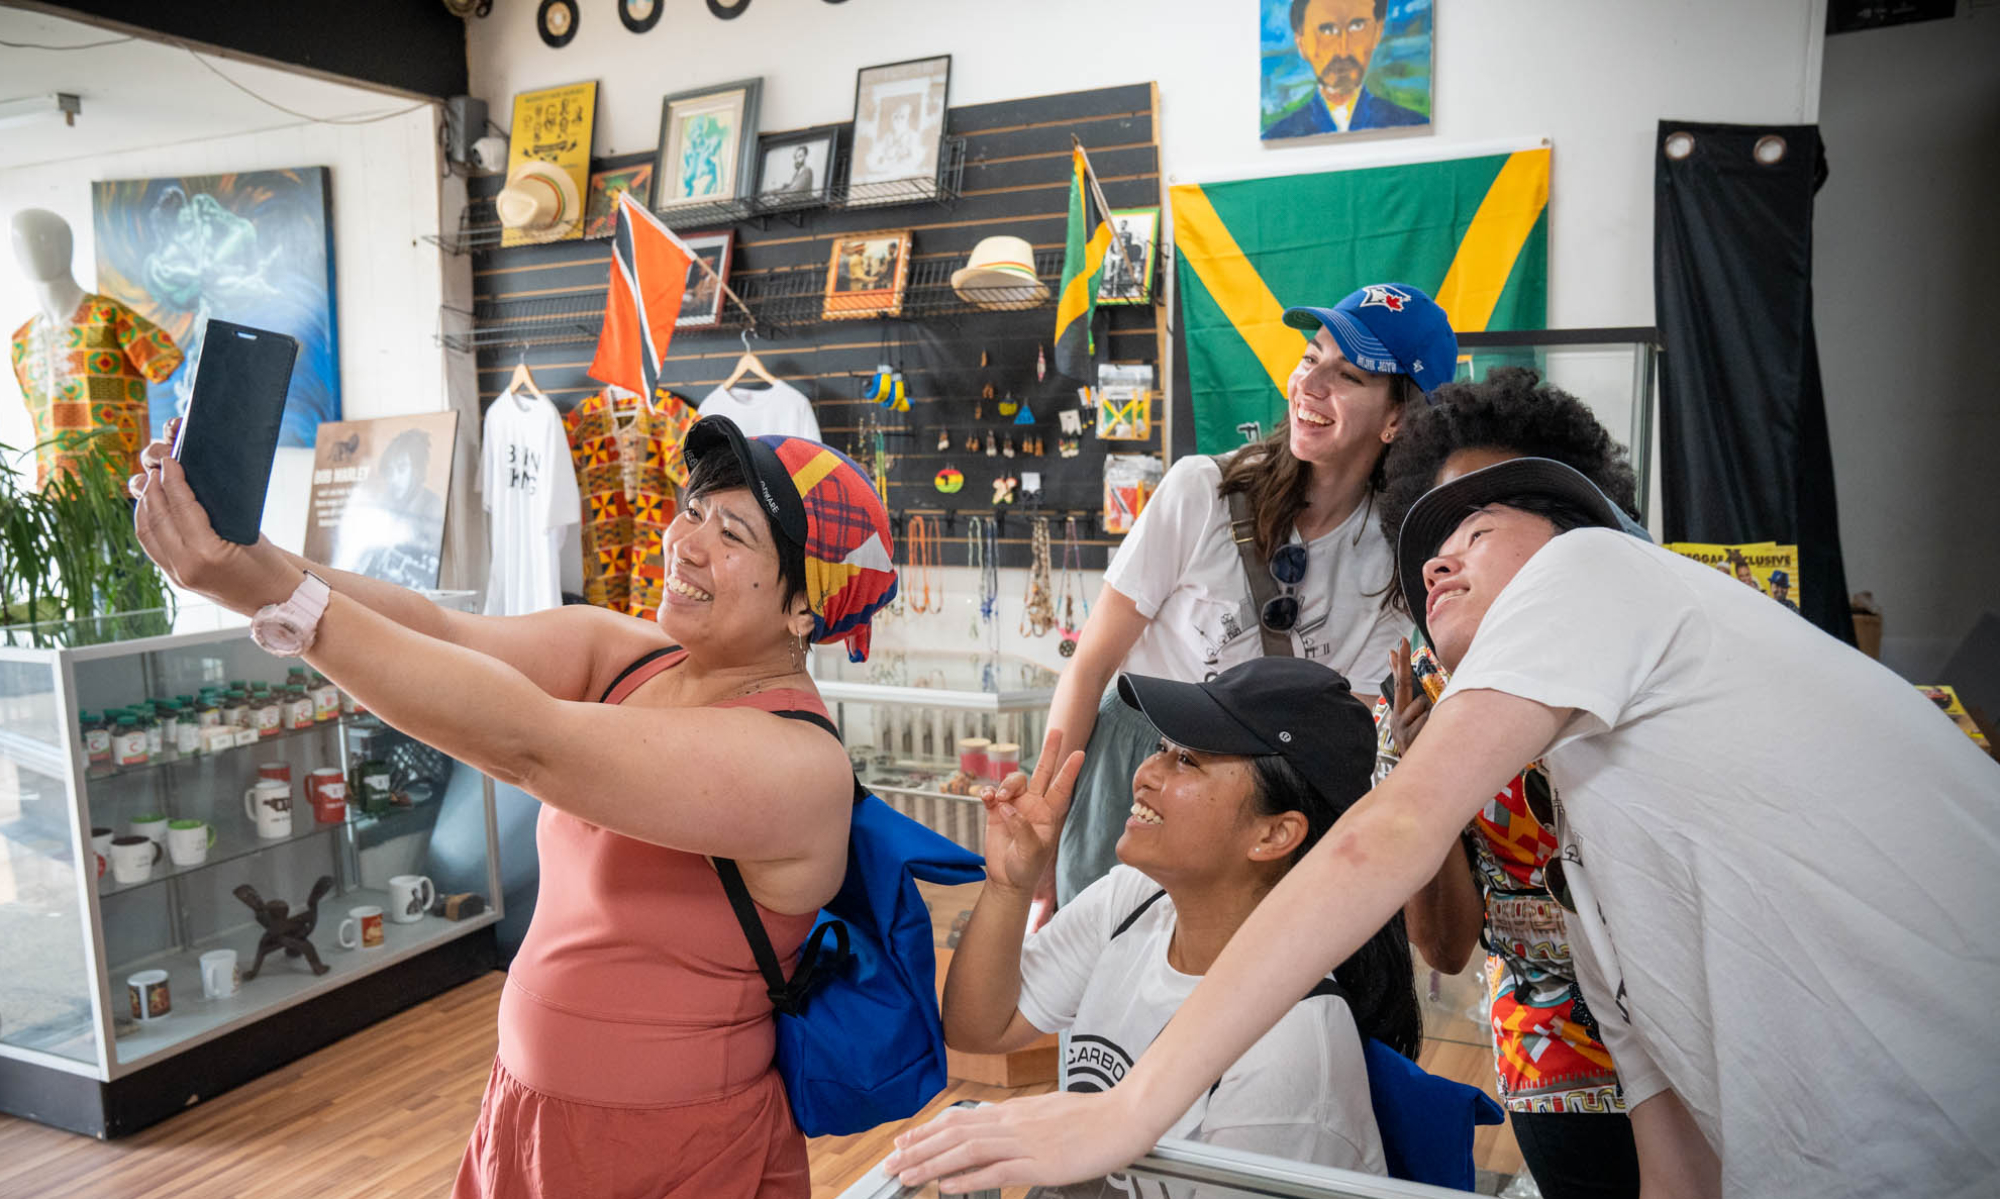 A group of people pose and take a selfie in a store with various displays along the walls and in cabinets.